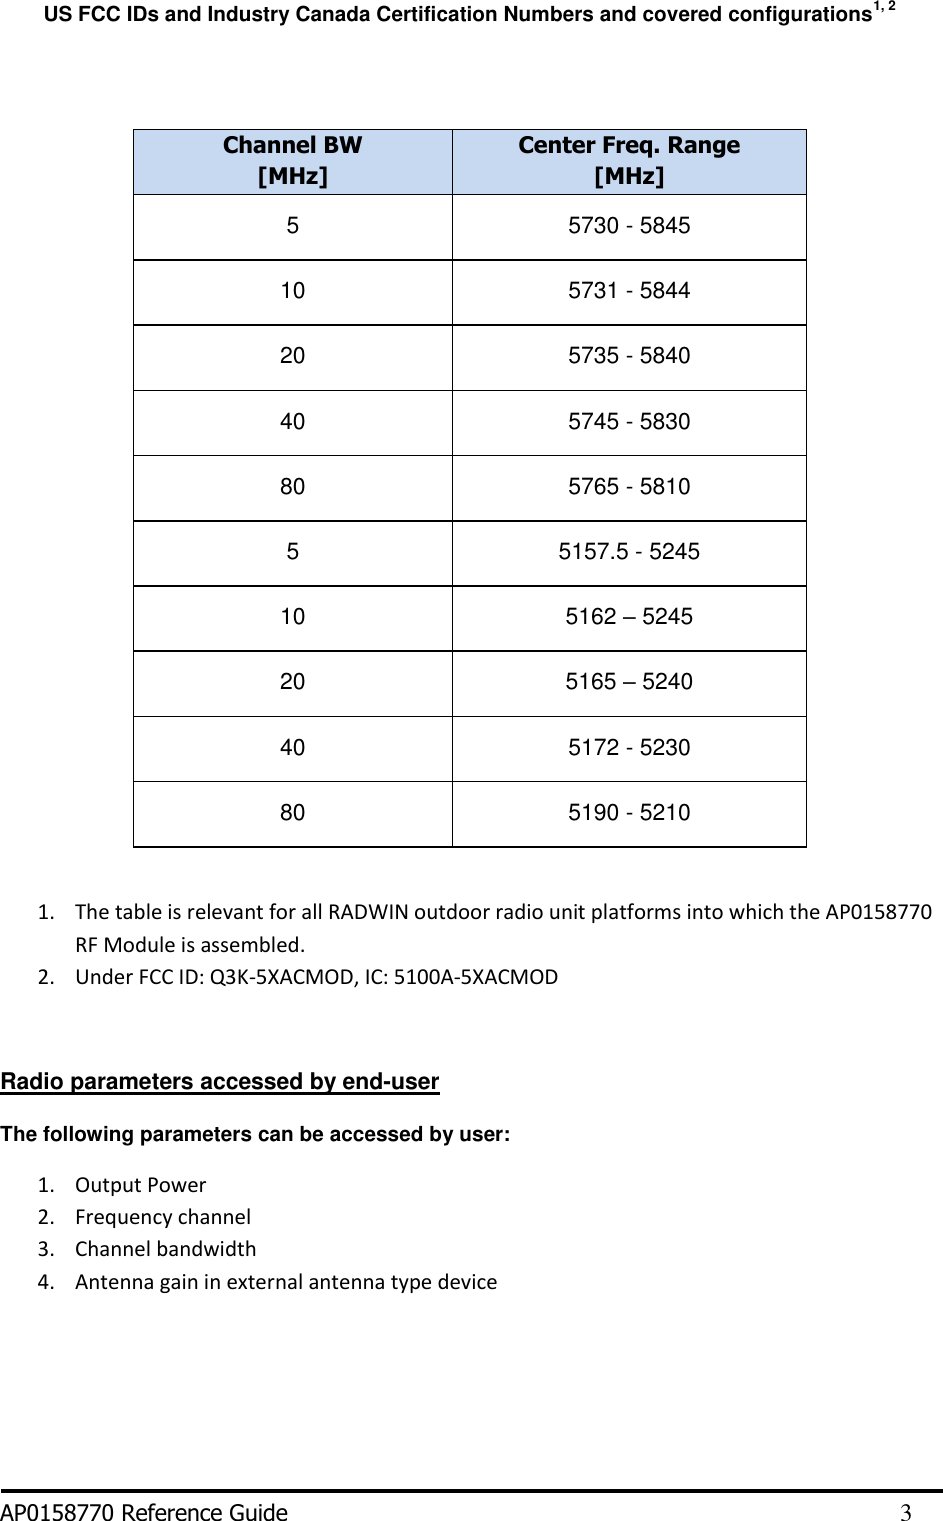 US FCC IDs and Industry Canada Certification Numbers and covered configurations1, 2                 1. The table is relevant for all RADWIN outdoor radio unit platforms into which the AP0158770 RF Module is assembled. 2. Under FCC ID: Q3K-5XACMOD, IC: 5100A-5XACMOD  Radio parameters accessed by end-user  The following parameters can be accessed by user: 1. Output Power 2. Frequency channel 3. Channel bandwidth 4. Antenna gain in external antenna type device     AP0158770 Reference Guide         3 Channel BW [MHz] Center Freq. Range [MHz] 5 5730 - 5845 10 5731 - 5844 20 5735 - 5840 40 5745 - 5830 80 5765 - 5810 5 5157.5 - 5245 10 5162 – 5245 20 5165 – 5240 40 5172 - 5230 80 5190 - 5210 